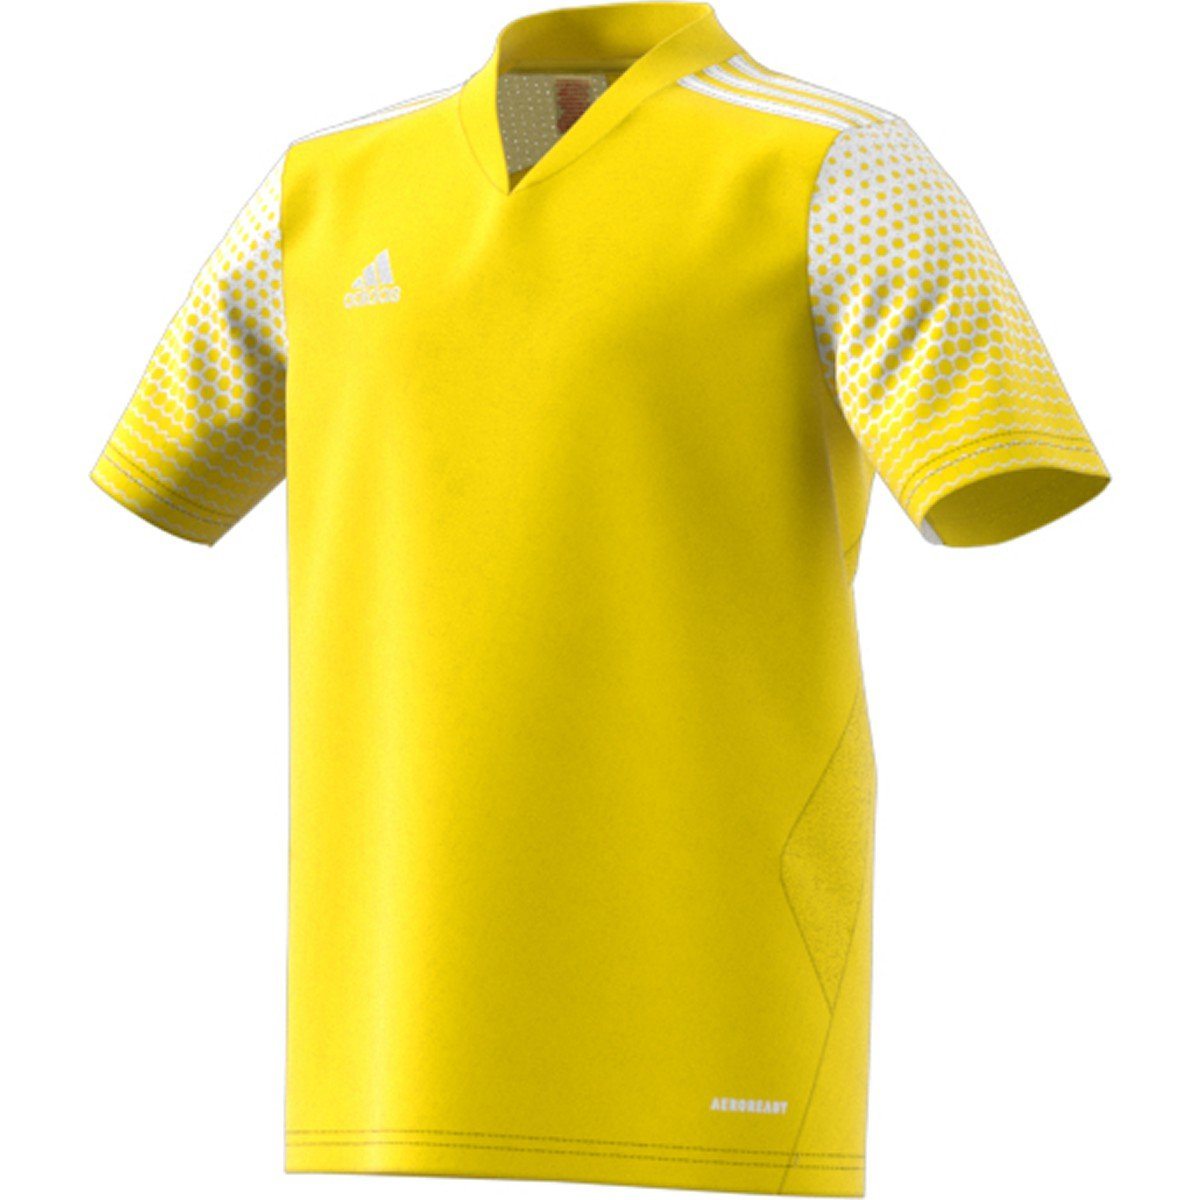 adidas Youth Regista 20 Jersey Jersey Adidas Youth 2X-Small team yellow/white 